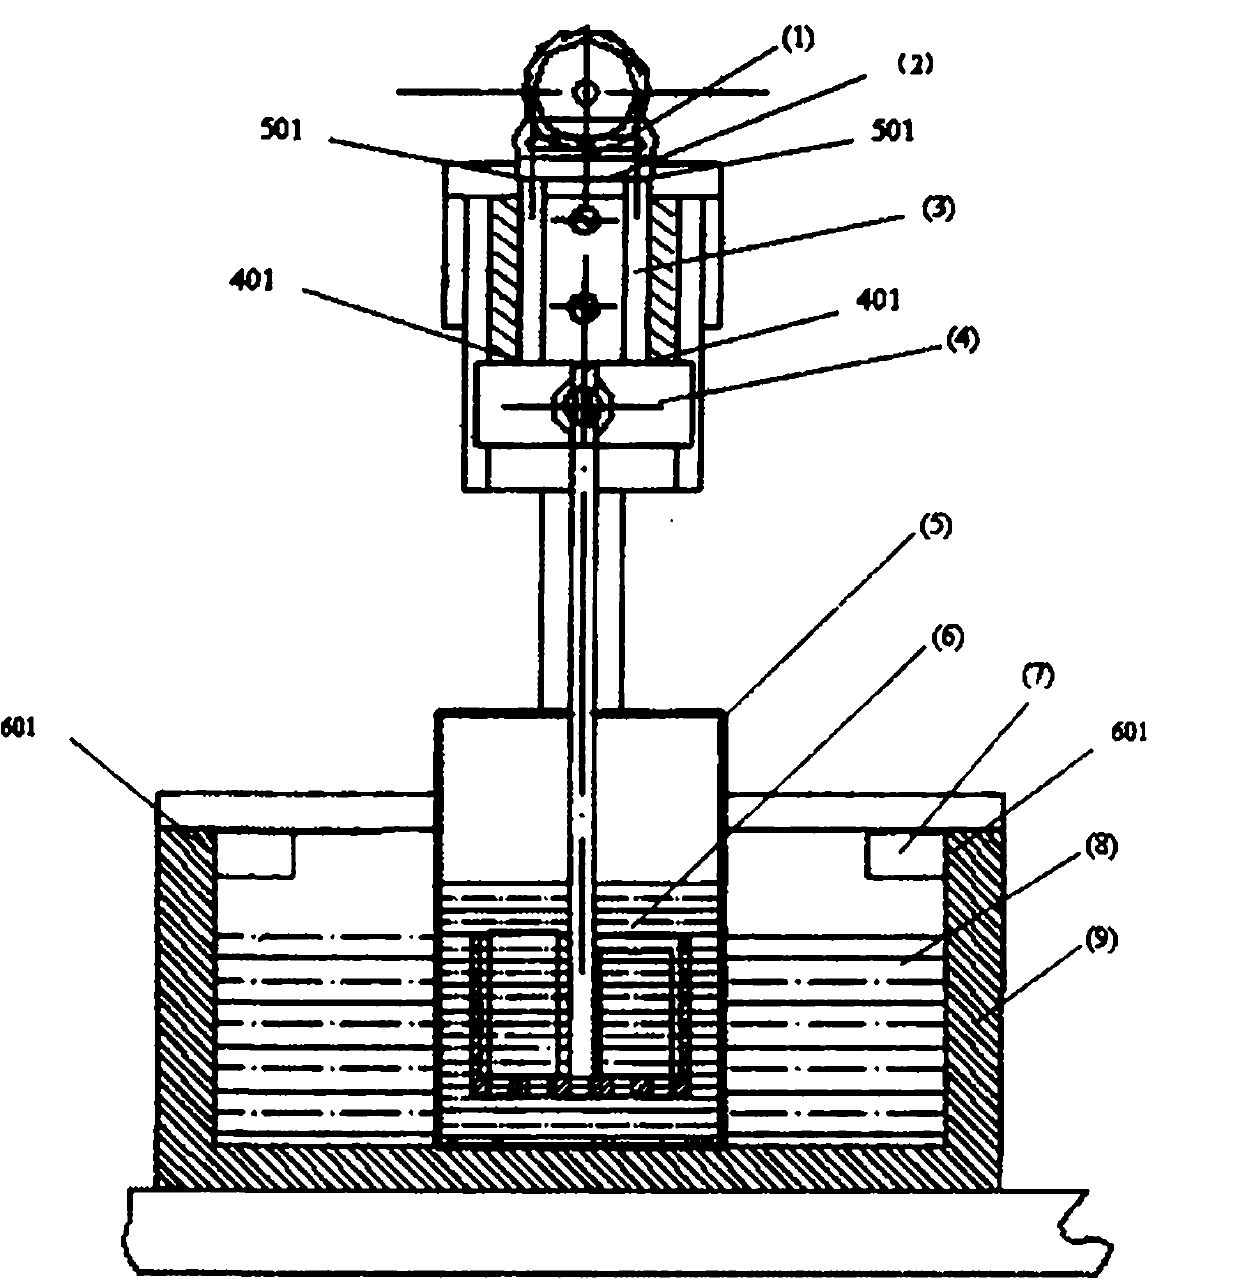 Automated dynamic cleaning device and method of tellurium-cadmium-mercury wafer solvent solution